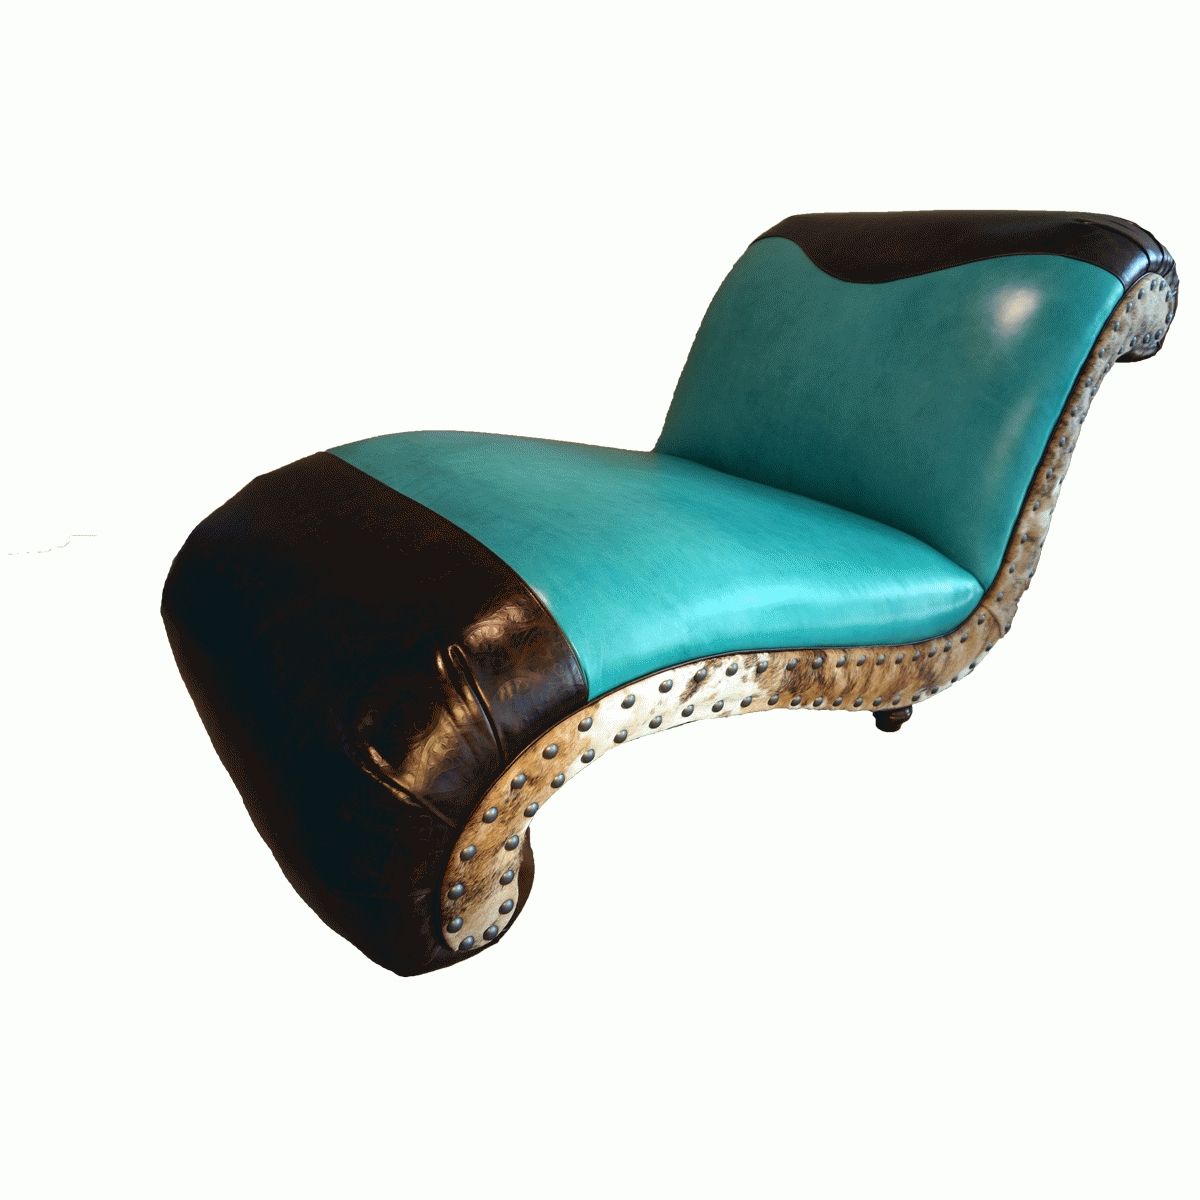 Albuquerque Turquoise Chaise Lounge Within Most Up To Date Teal Chaise Lounges (Photo 2 of 15)